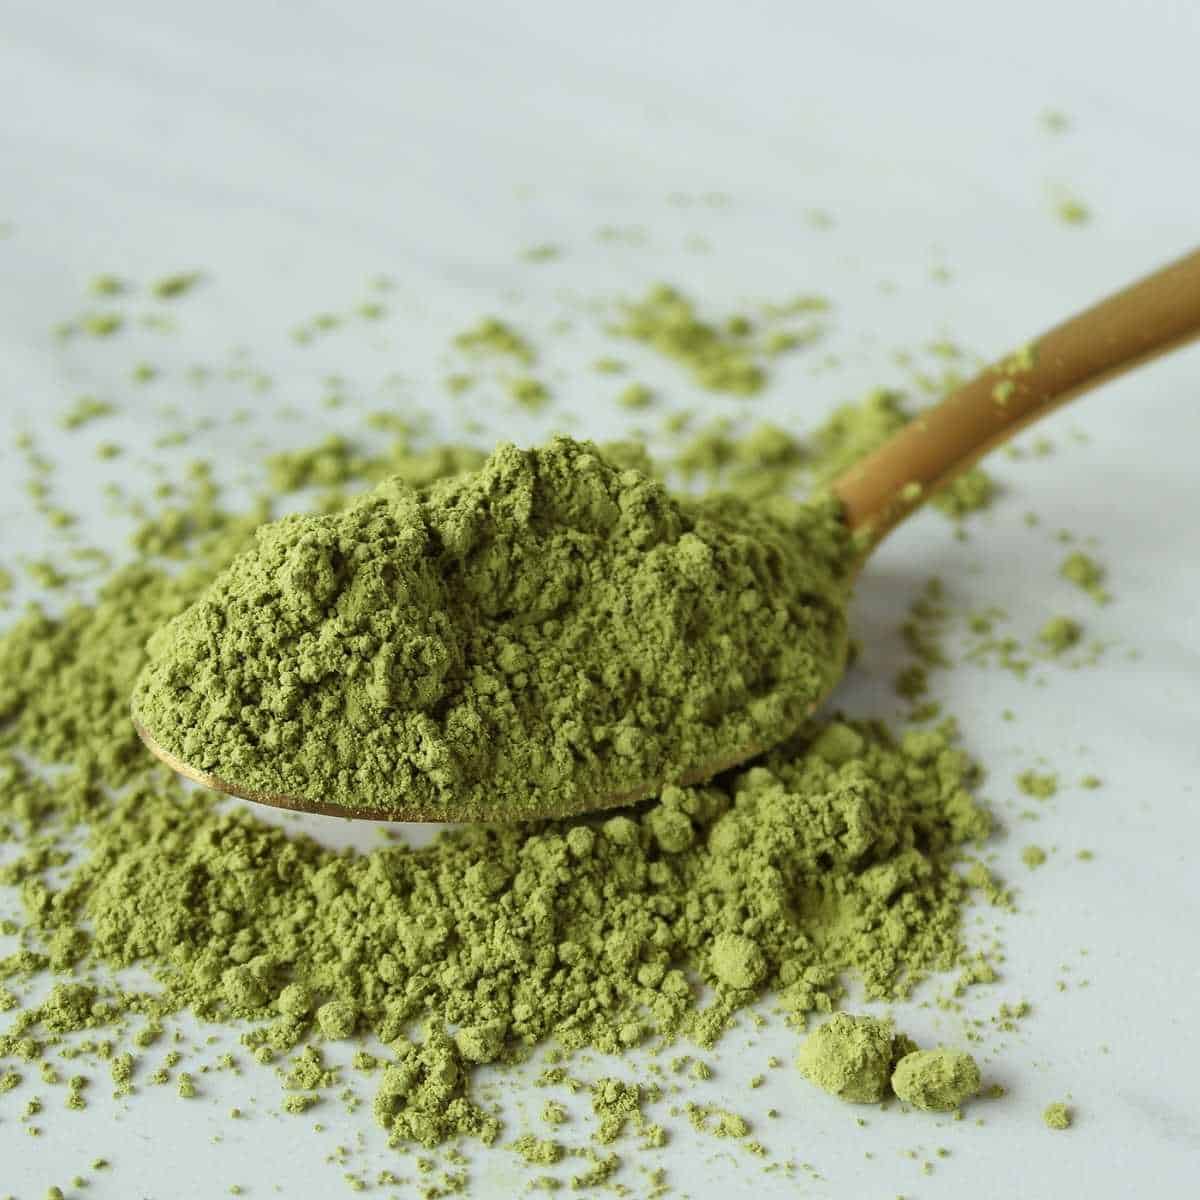 Green tea powder on a wooden spoon spilling over onto a white surface.